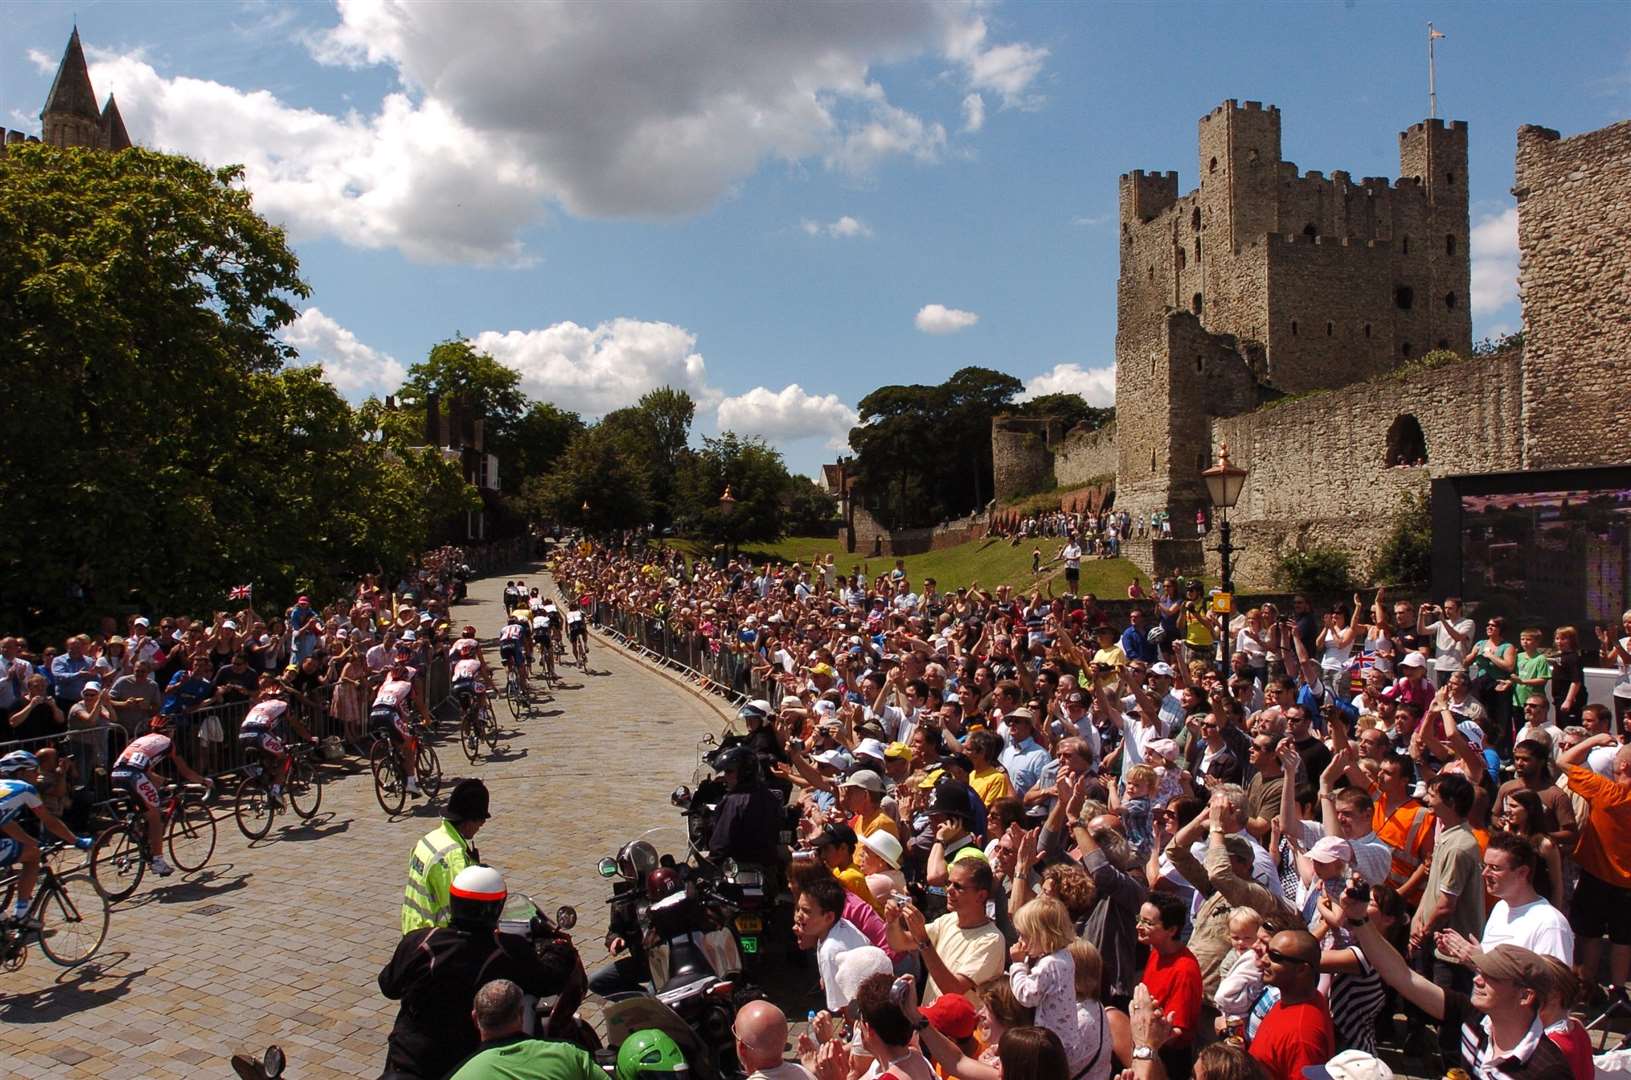 Crowds watching the 2007 Tour de France through Rochester